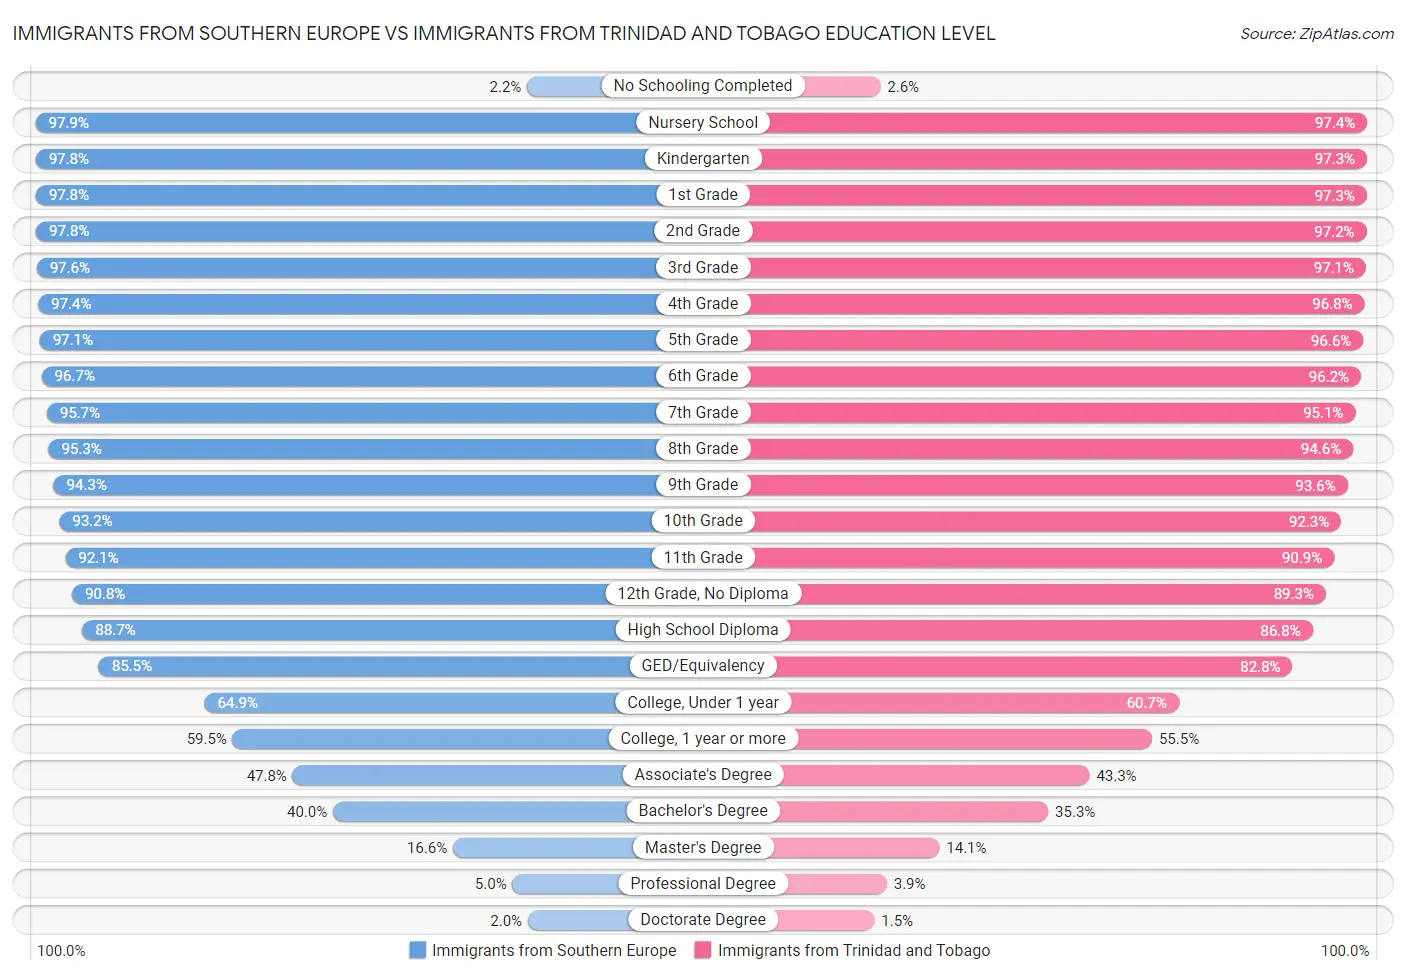 Immigrants from Southern Europe vs Immigrants from Trinidad and Tobago Education Level